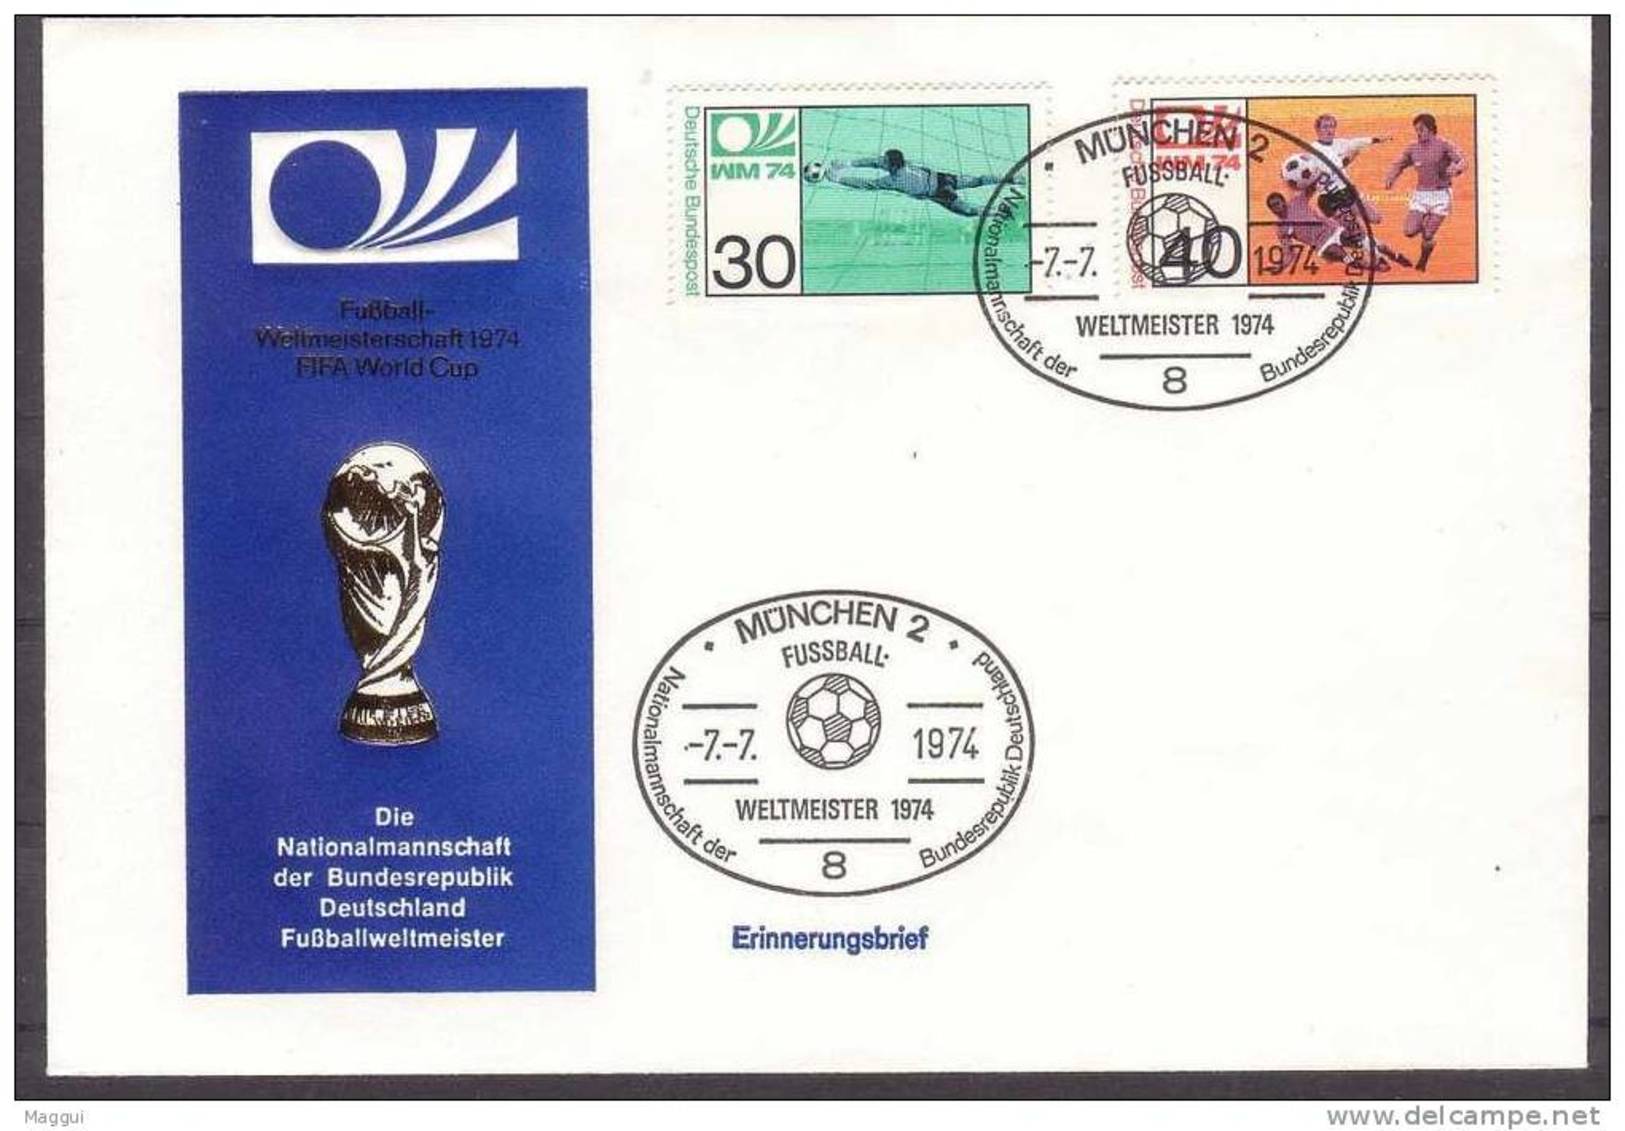 ALLEMAGNE  FDC  Cup  1974  Cachet MUNCHEN 2   Le 7 -7- 74  Football  Soccer  Fussball - 1974 – Germania Ovest